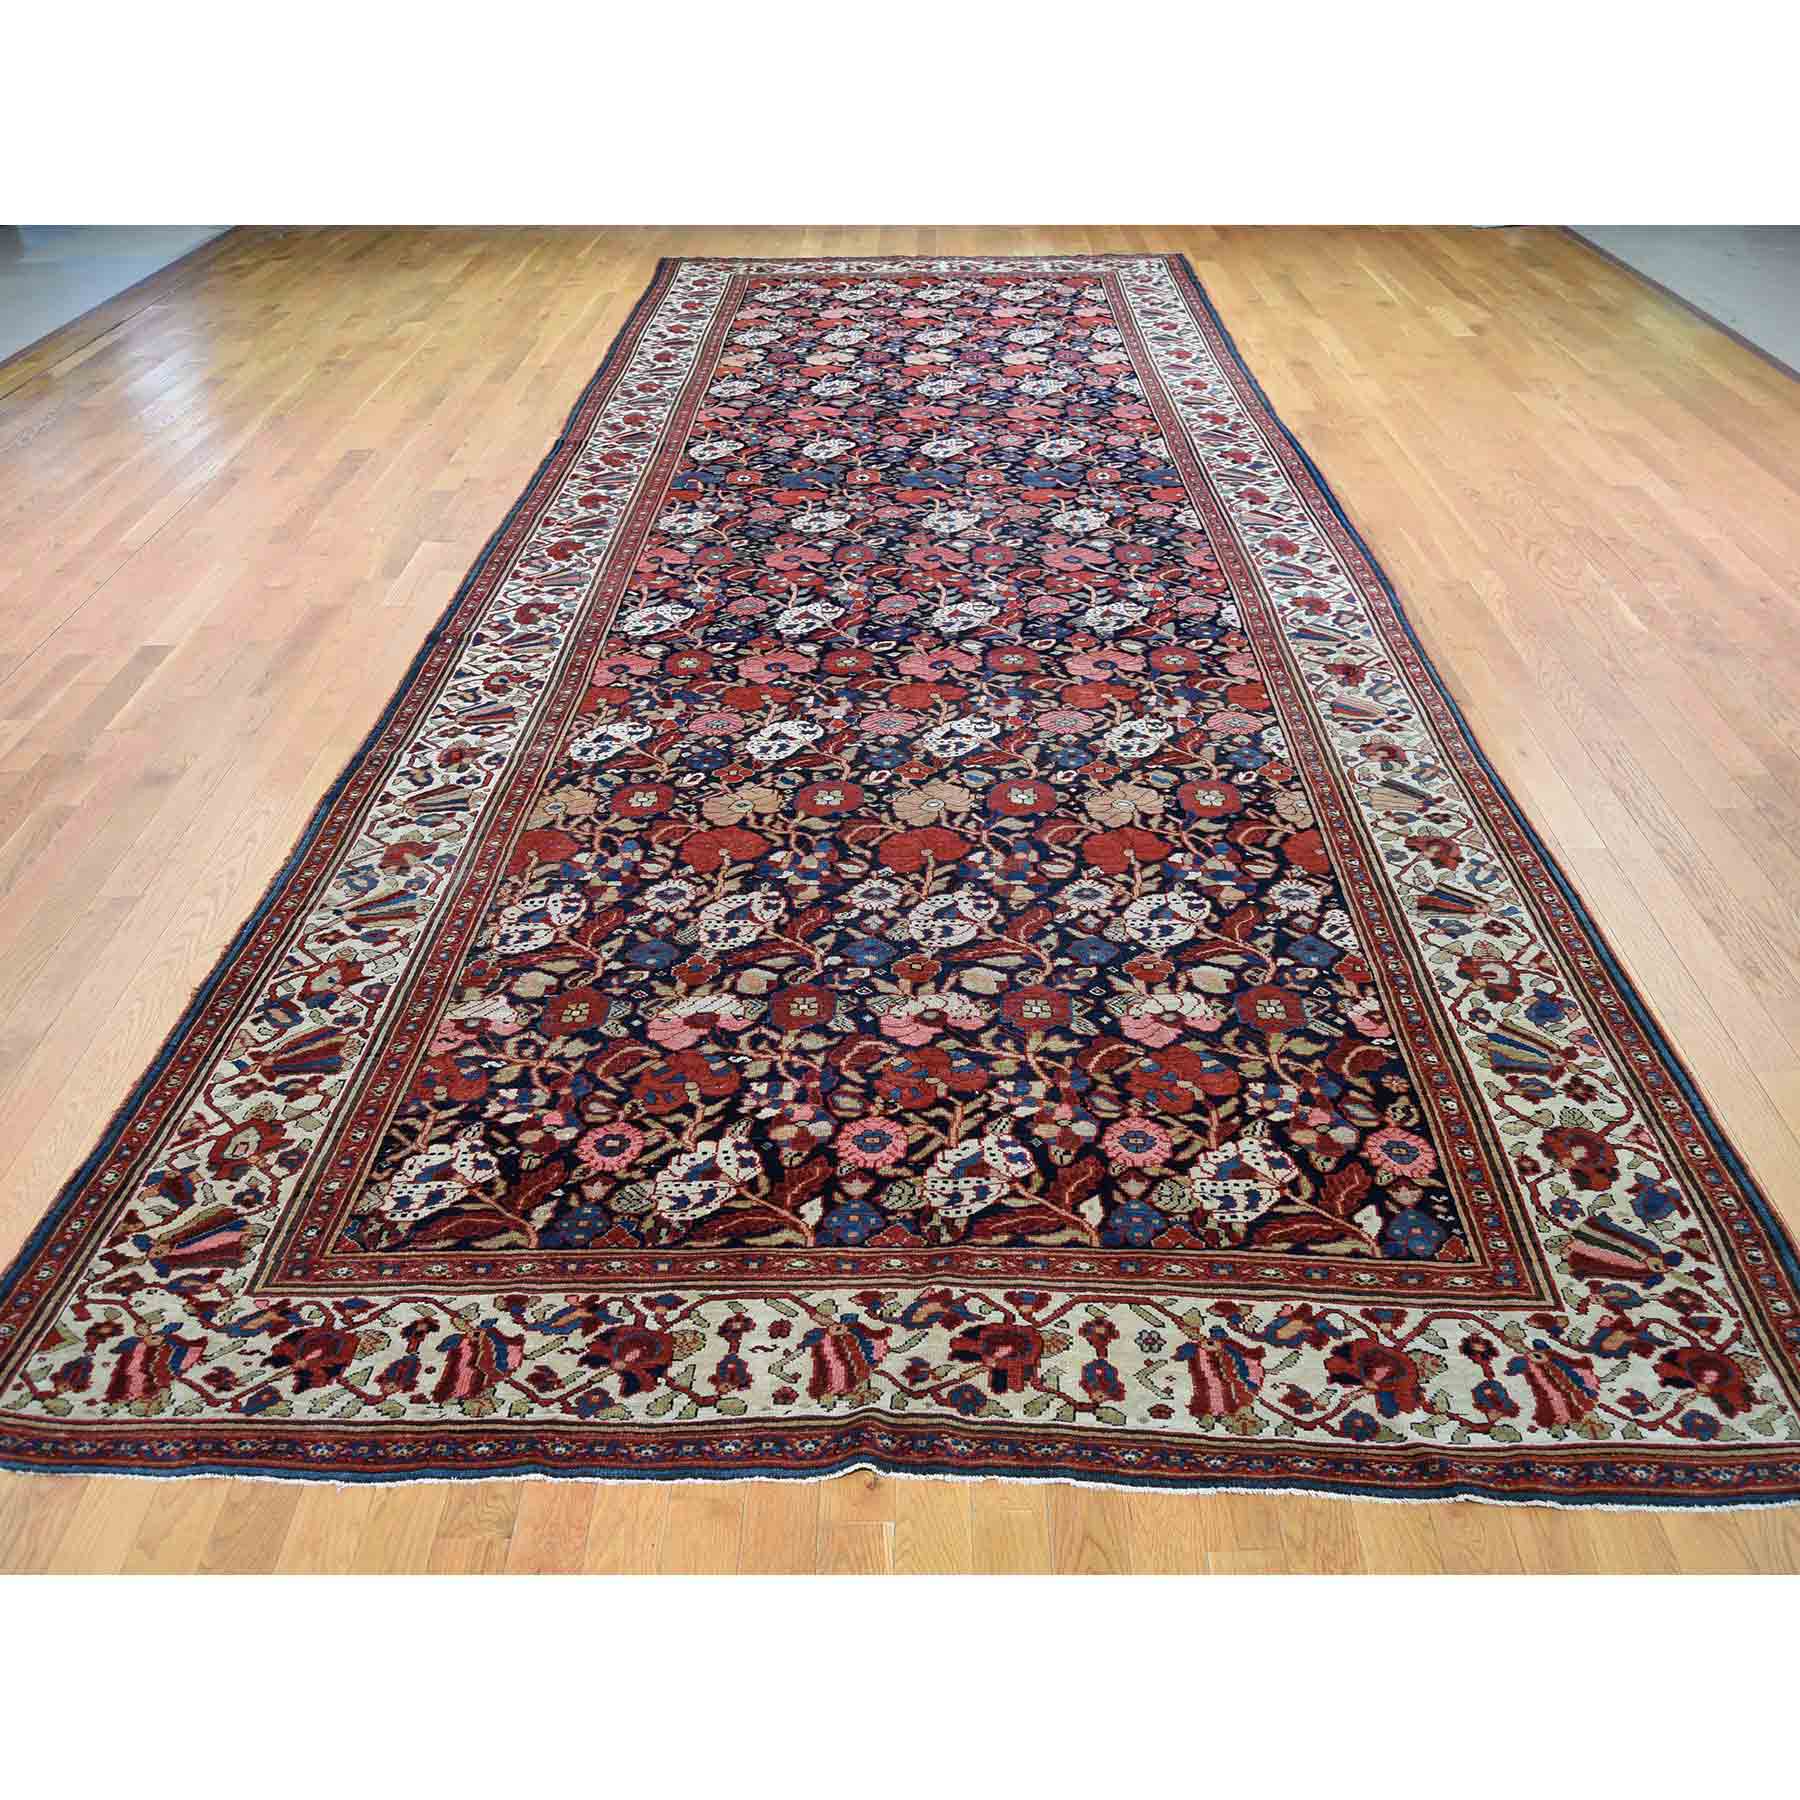 Antique-Hand-Knotted-Rug-232210